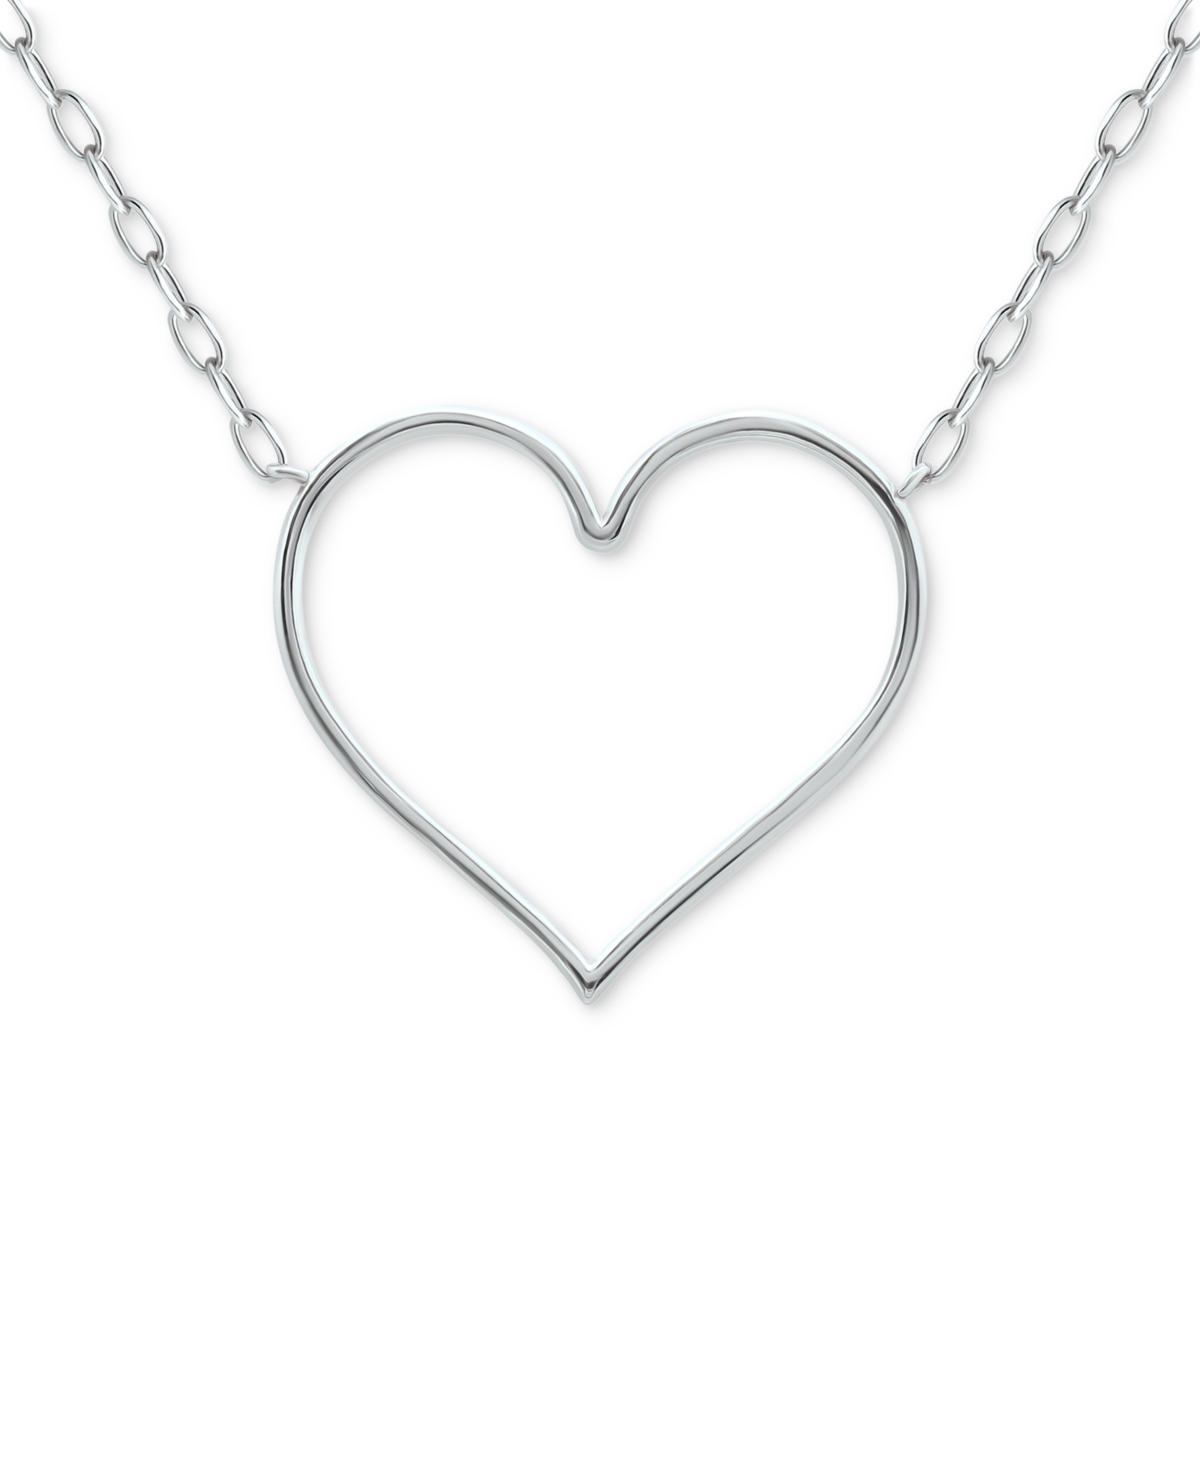 Giani Bernini Open Heart Pendant Necklace, 16" + 2" Extender, Created For Macy's In Silver